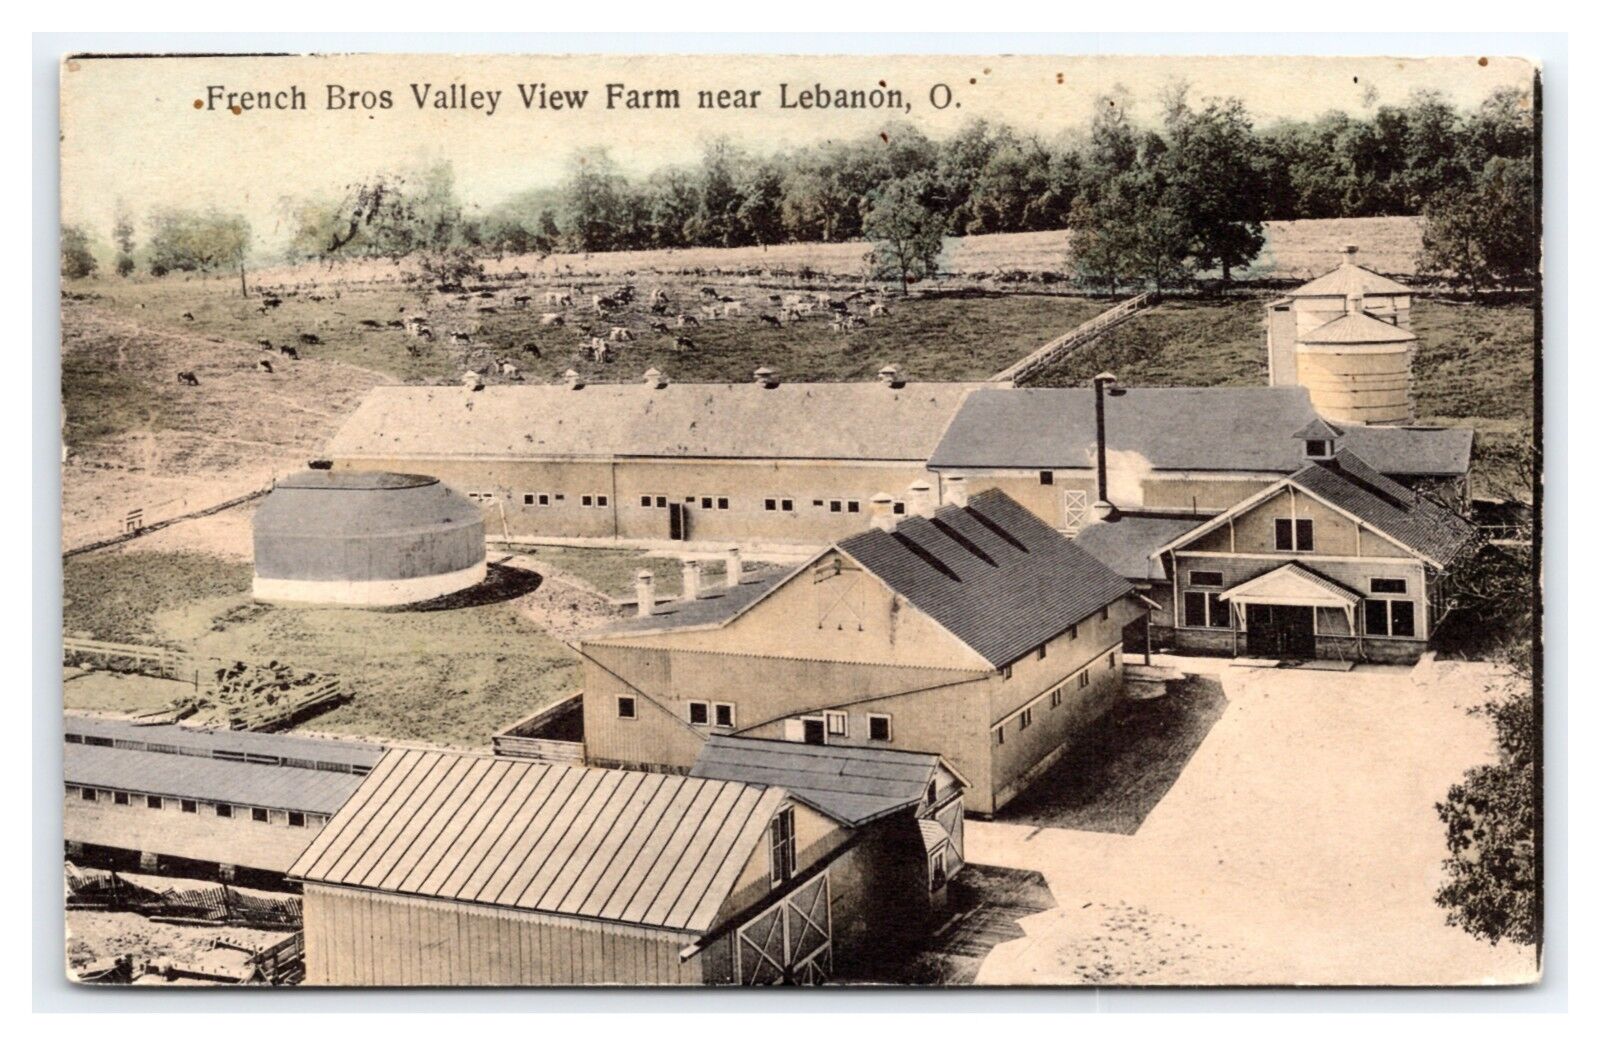 OHIO LEBANON FRENCH BROTHERS VALLEY FARM POSTED 1909 TO FRANK HOOK OF DAYTON.